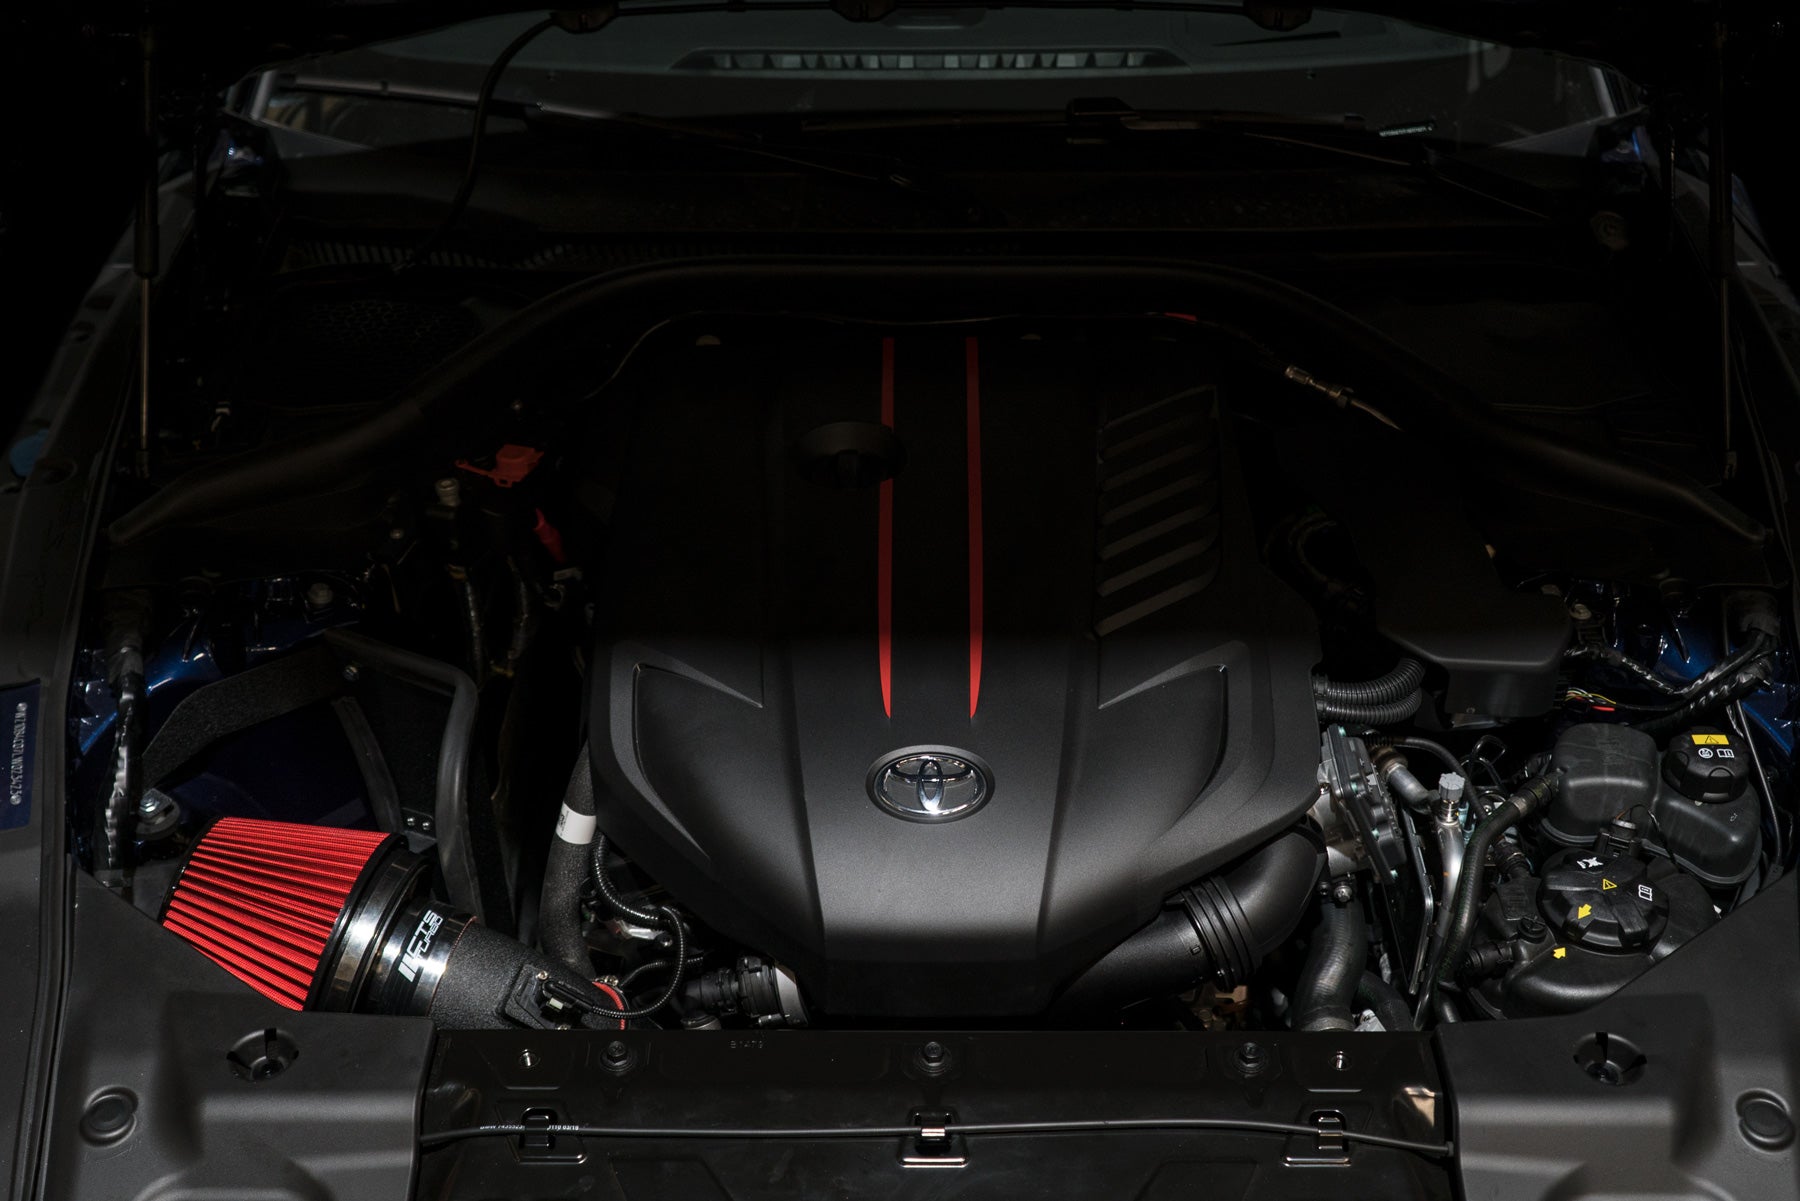 CTS Turbo Air Intake With 6" Velocity Stack - Toyota A90 Supra